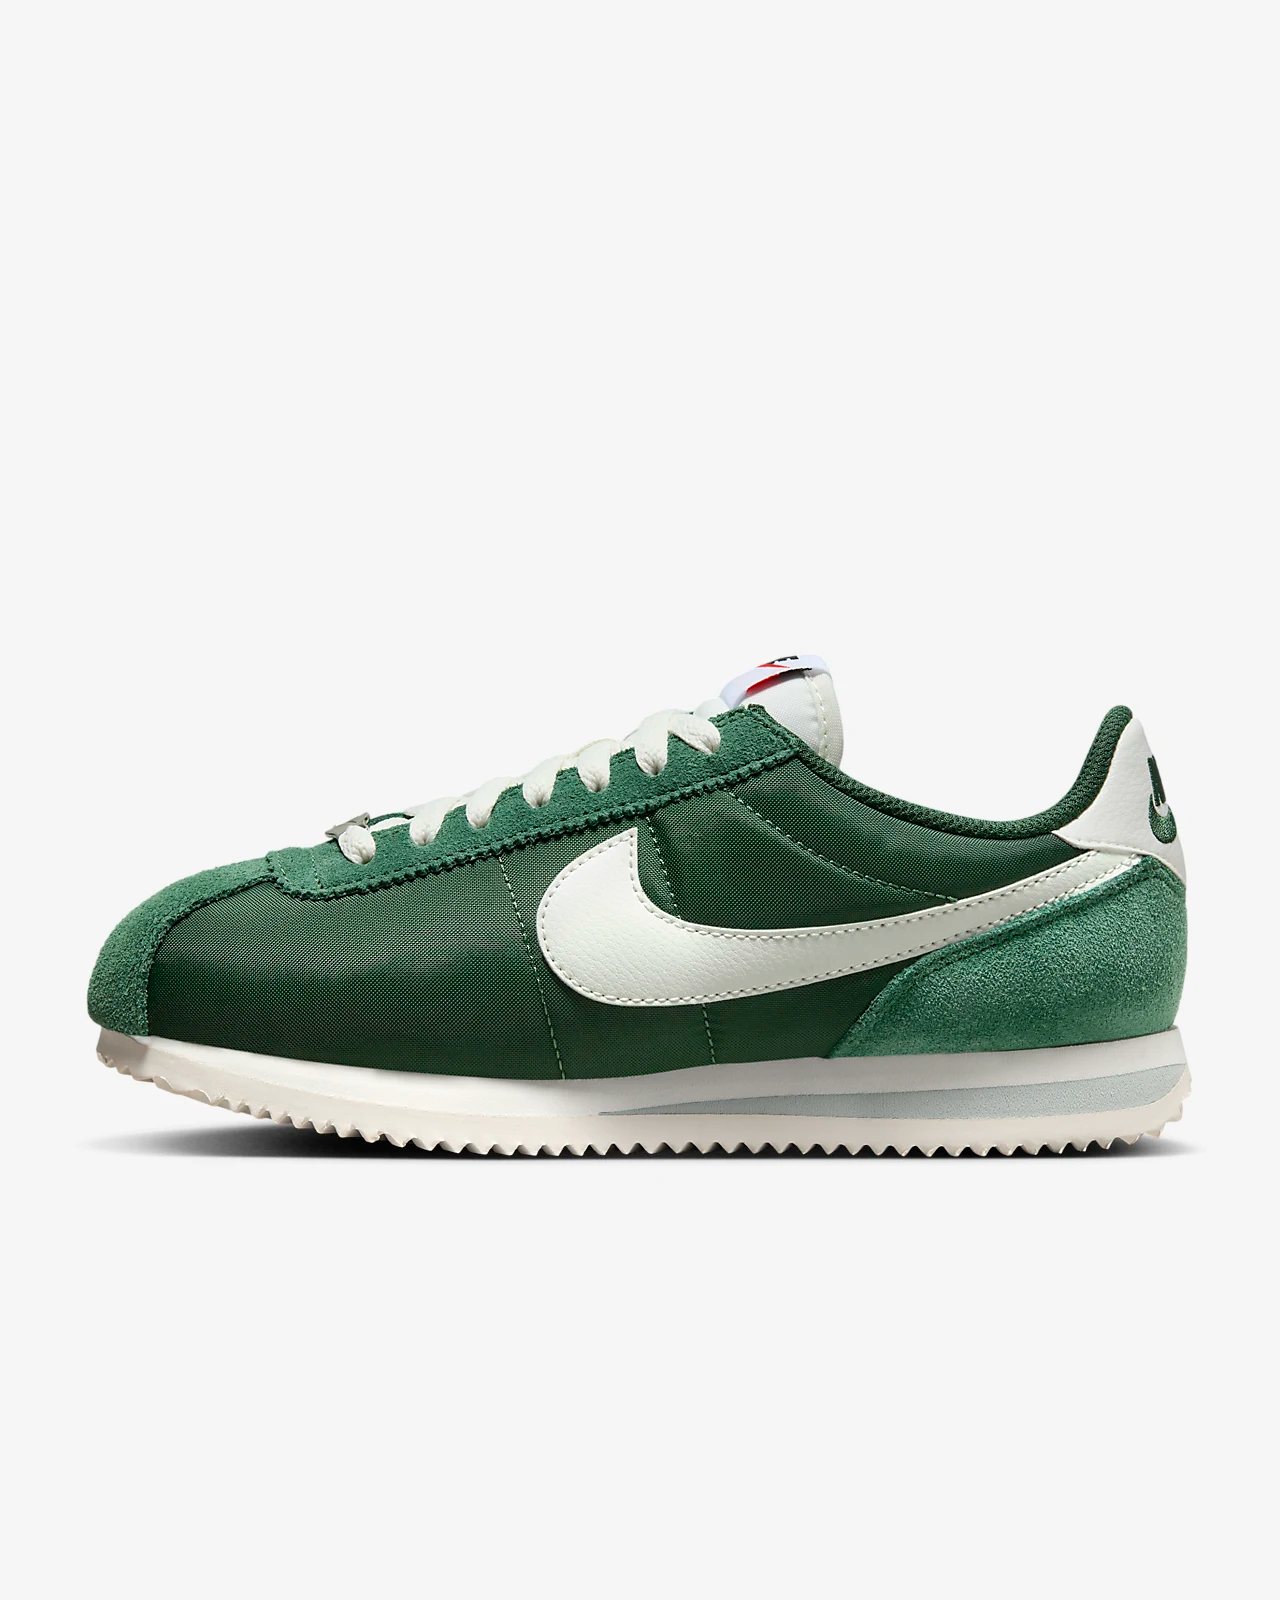 Women’s nike cortez shoes: A Timeless Classic for Every Wardrobe缩略图